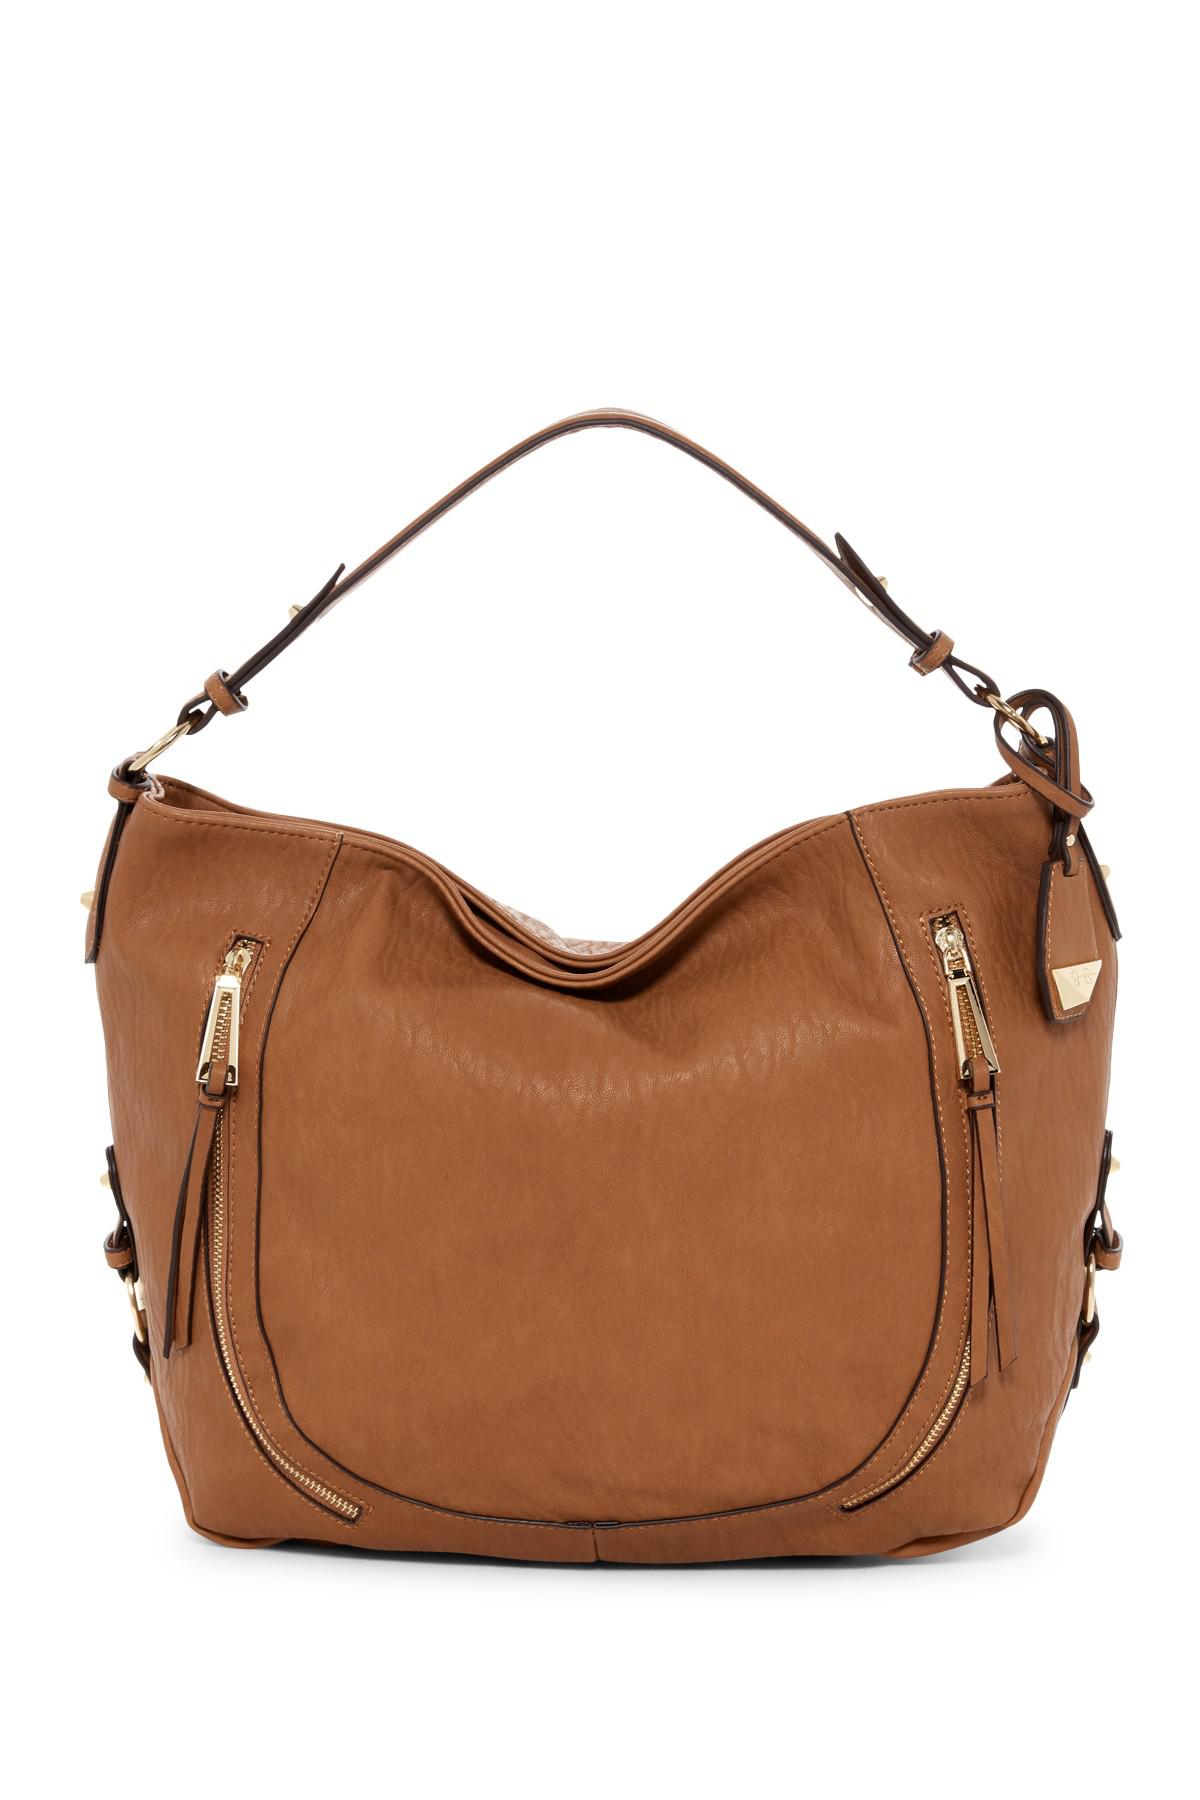 Jessica Simpson Roxanne Faux Leather Hobo Bag in Brown | Lyst